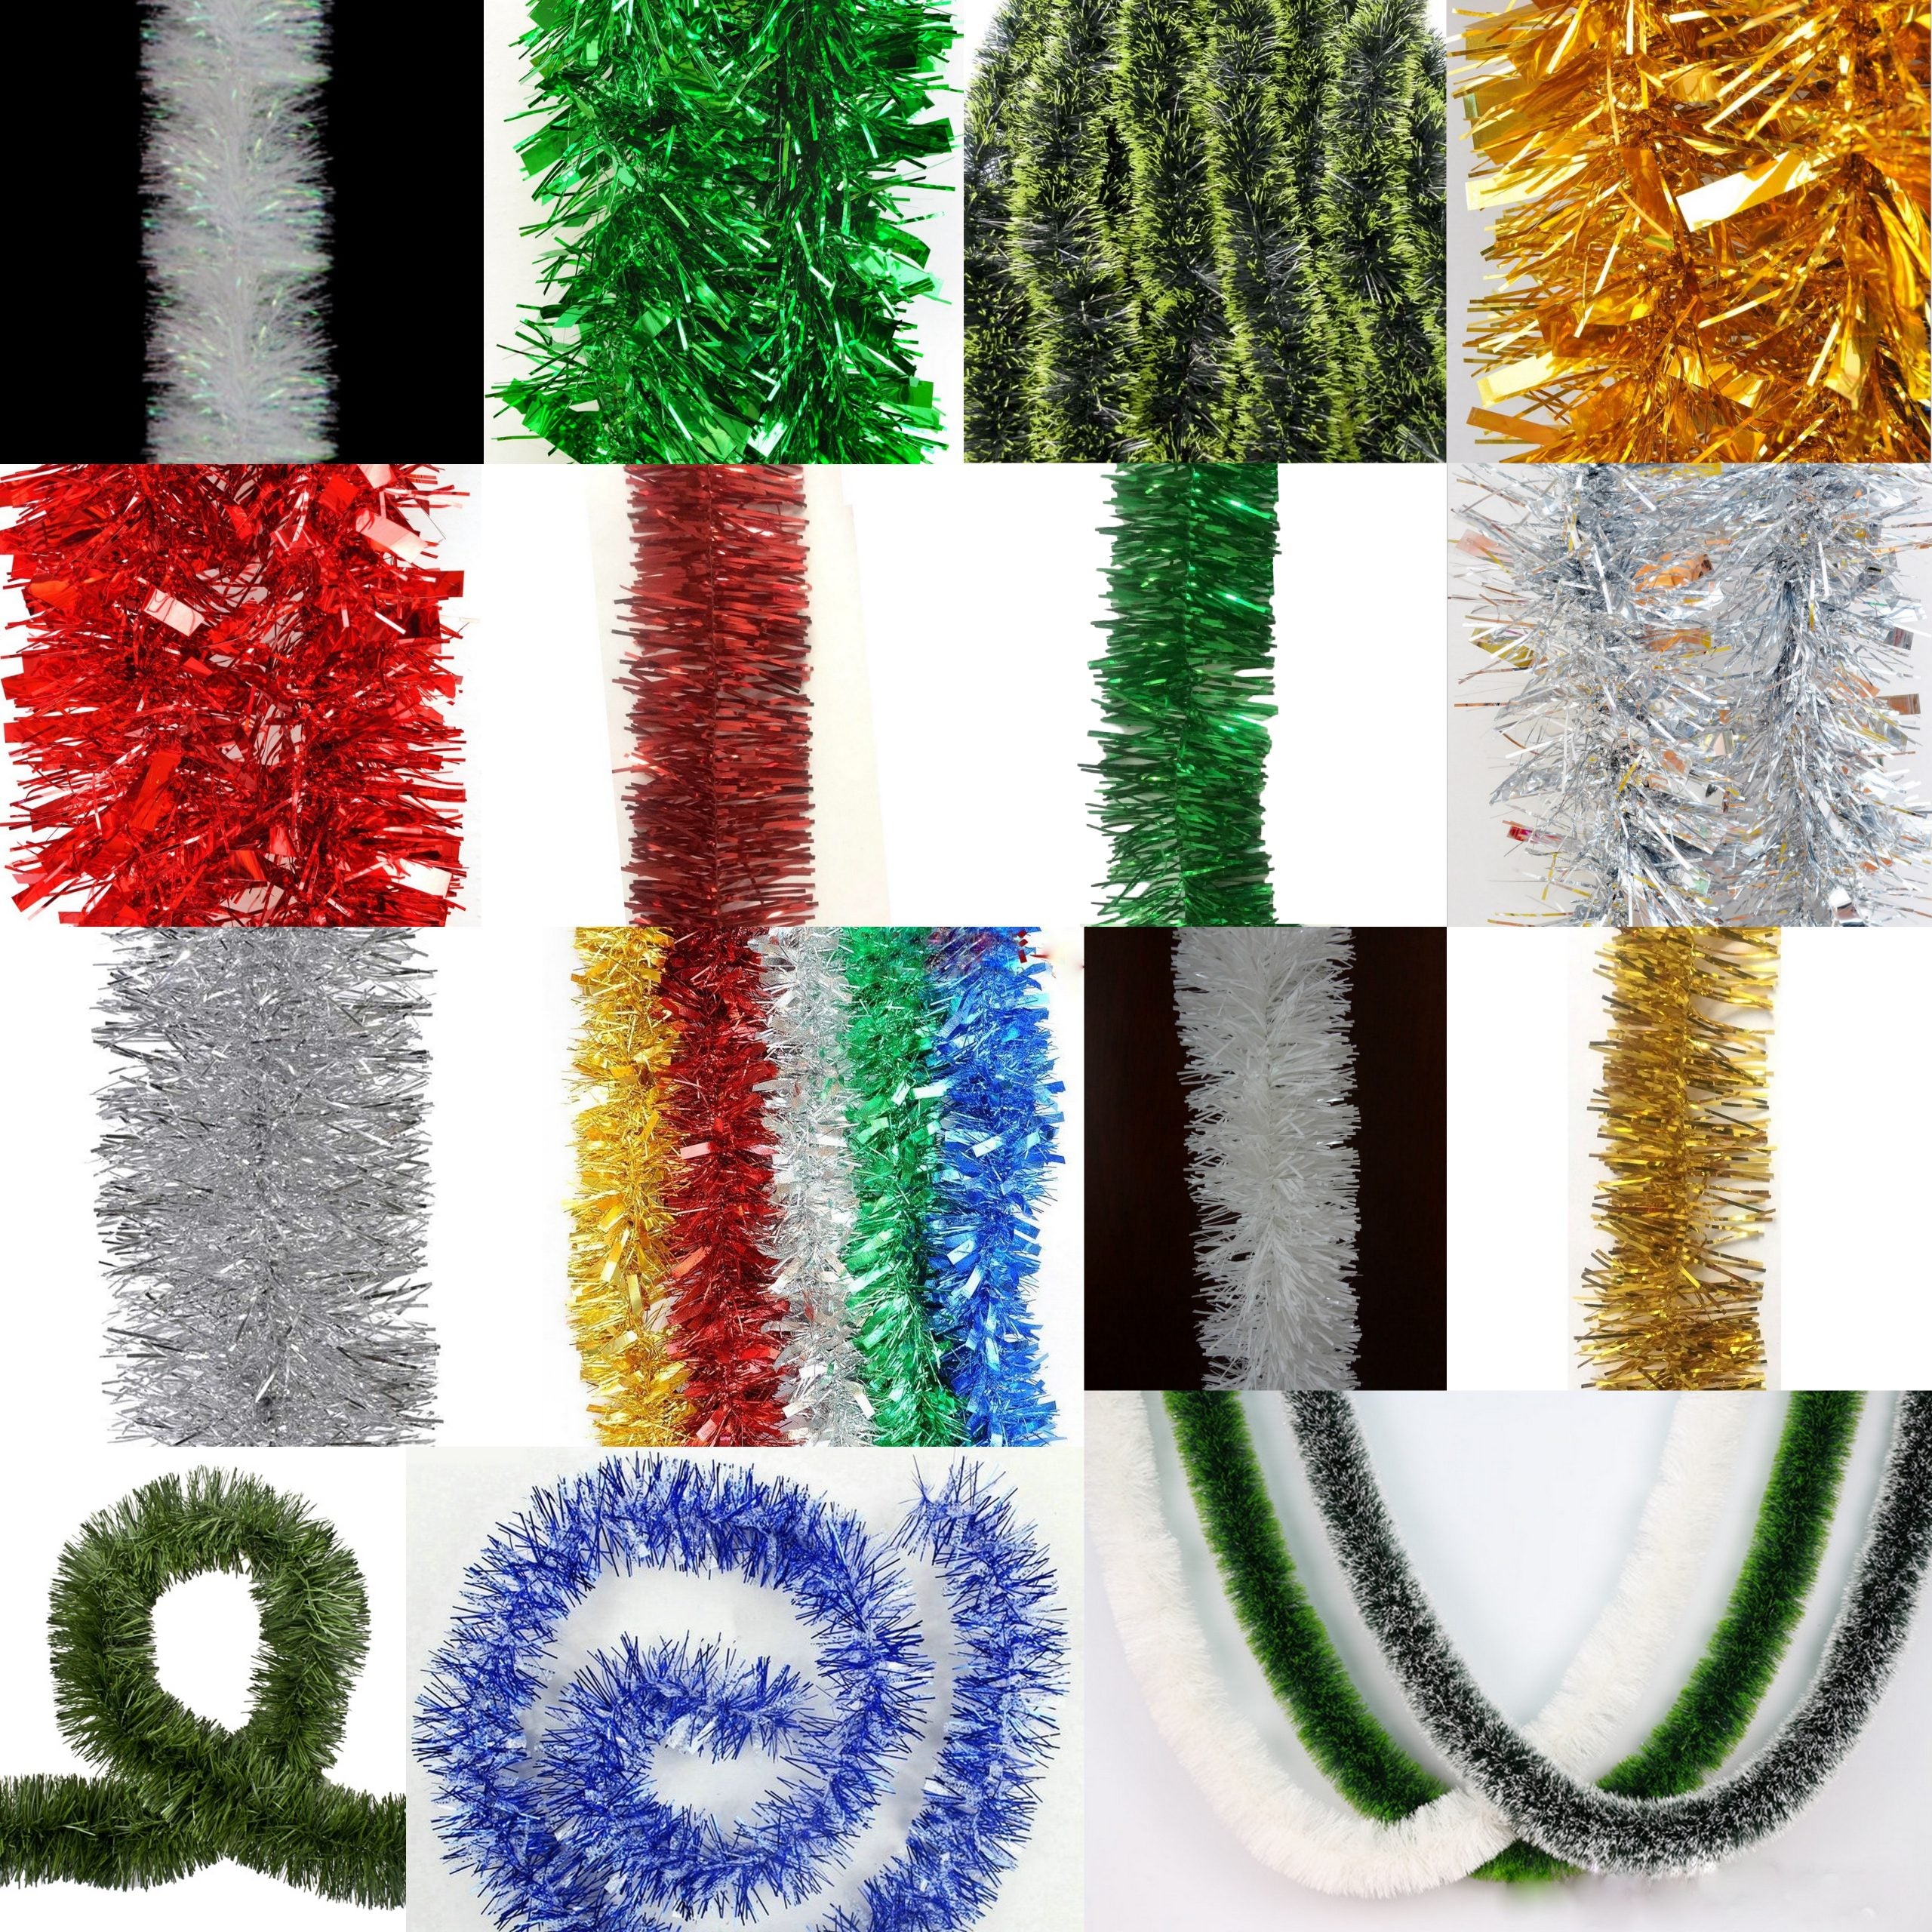 5x 2.5m Christmas Tinsel Xmas Garland Sparkly Snowflake Party Natural Home Décor, Bells (Blue) - SILBERSHELL